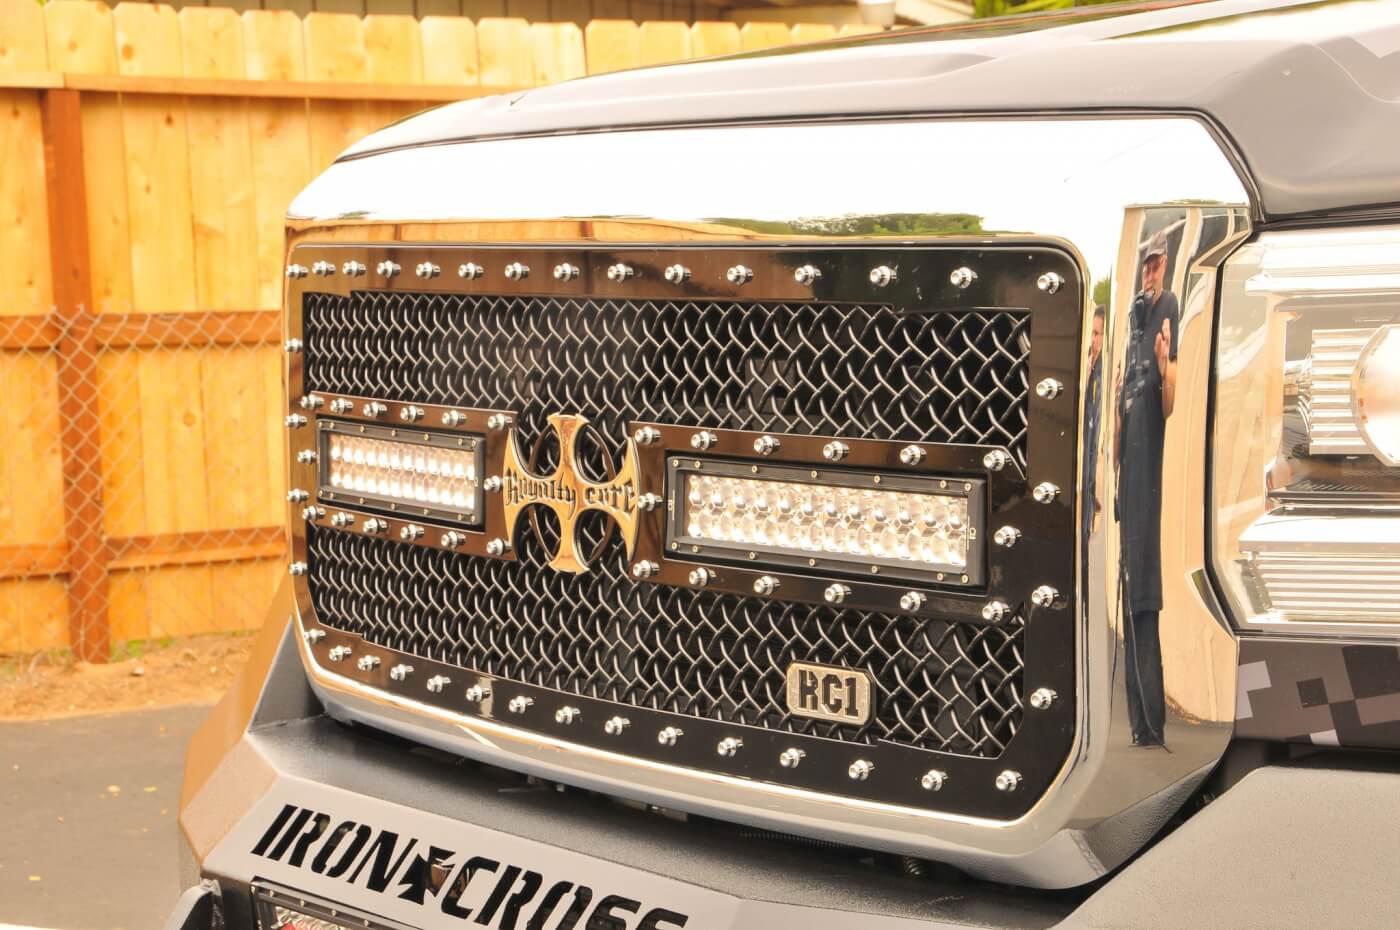 Royalty Core’s grille was mounted with Offroad LED Bars to light up the night.